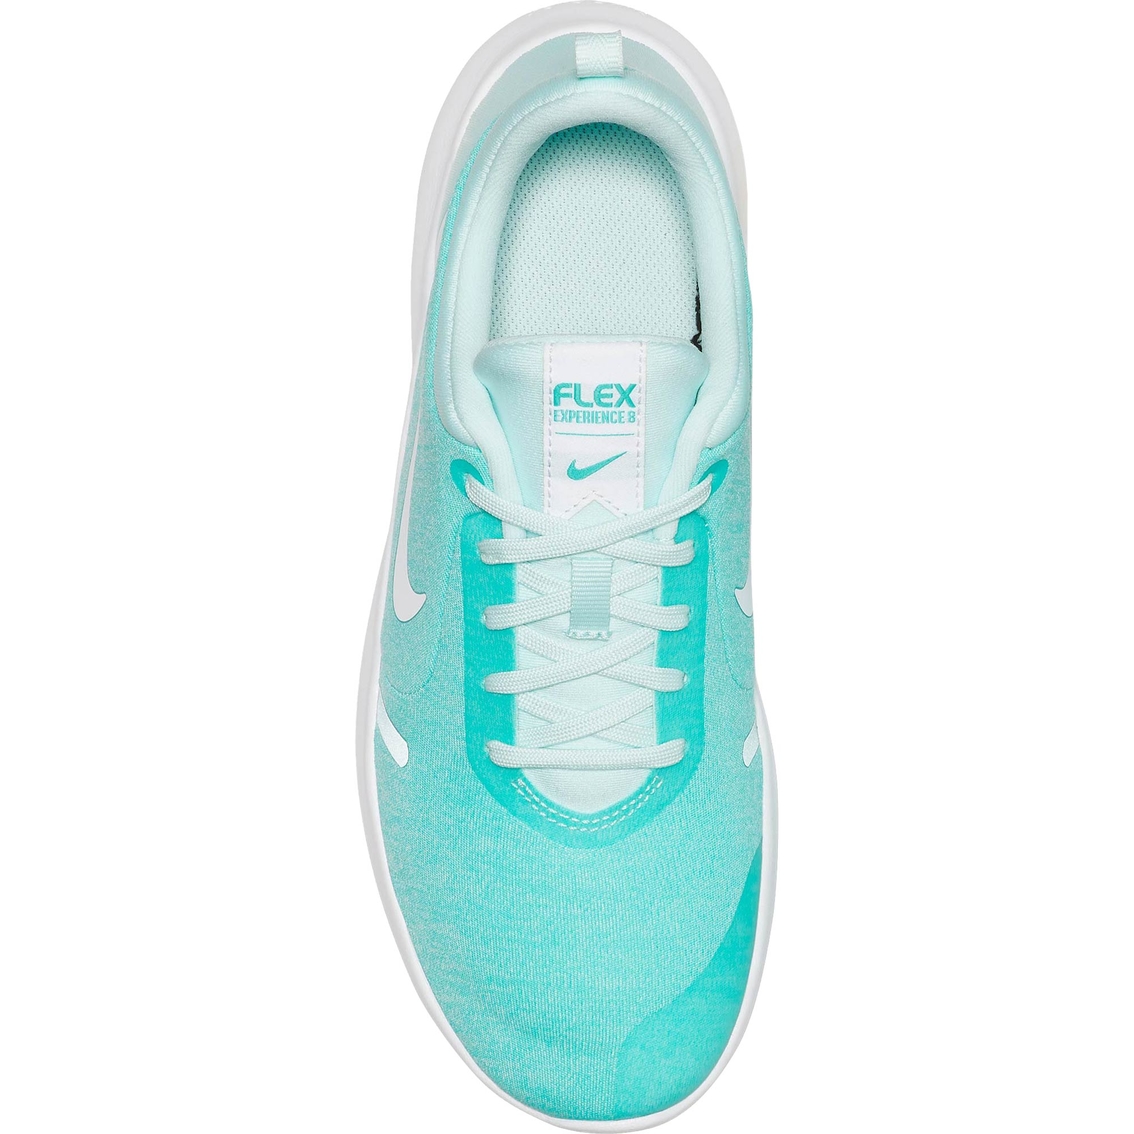 Nike Women's Flex Experience RN 8 Running Shoes - Image 4 of 6